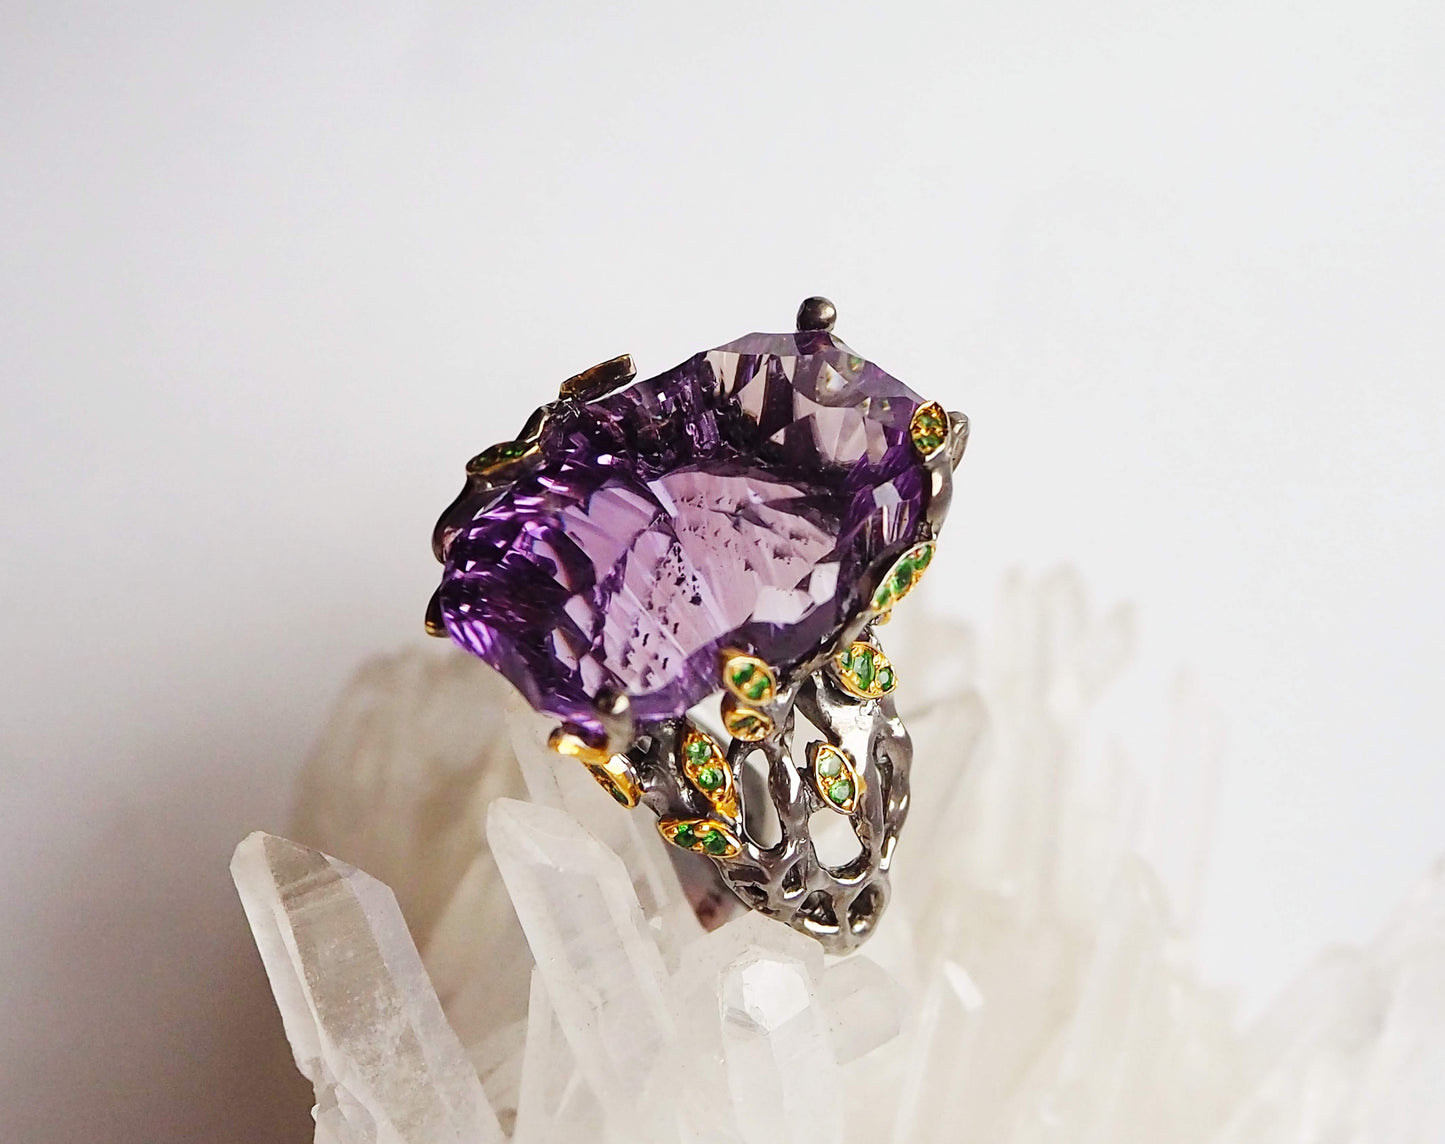 Silver Ring with Amethyst and Tsavorite Garnets